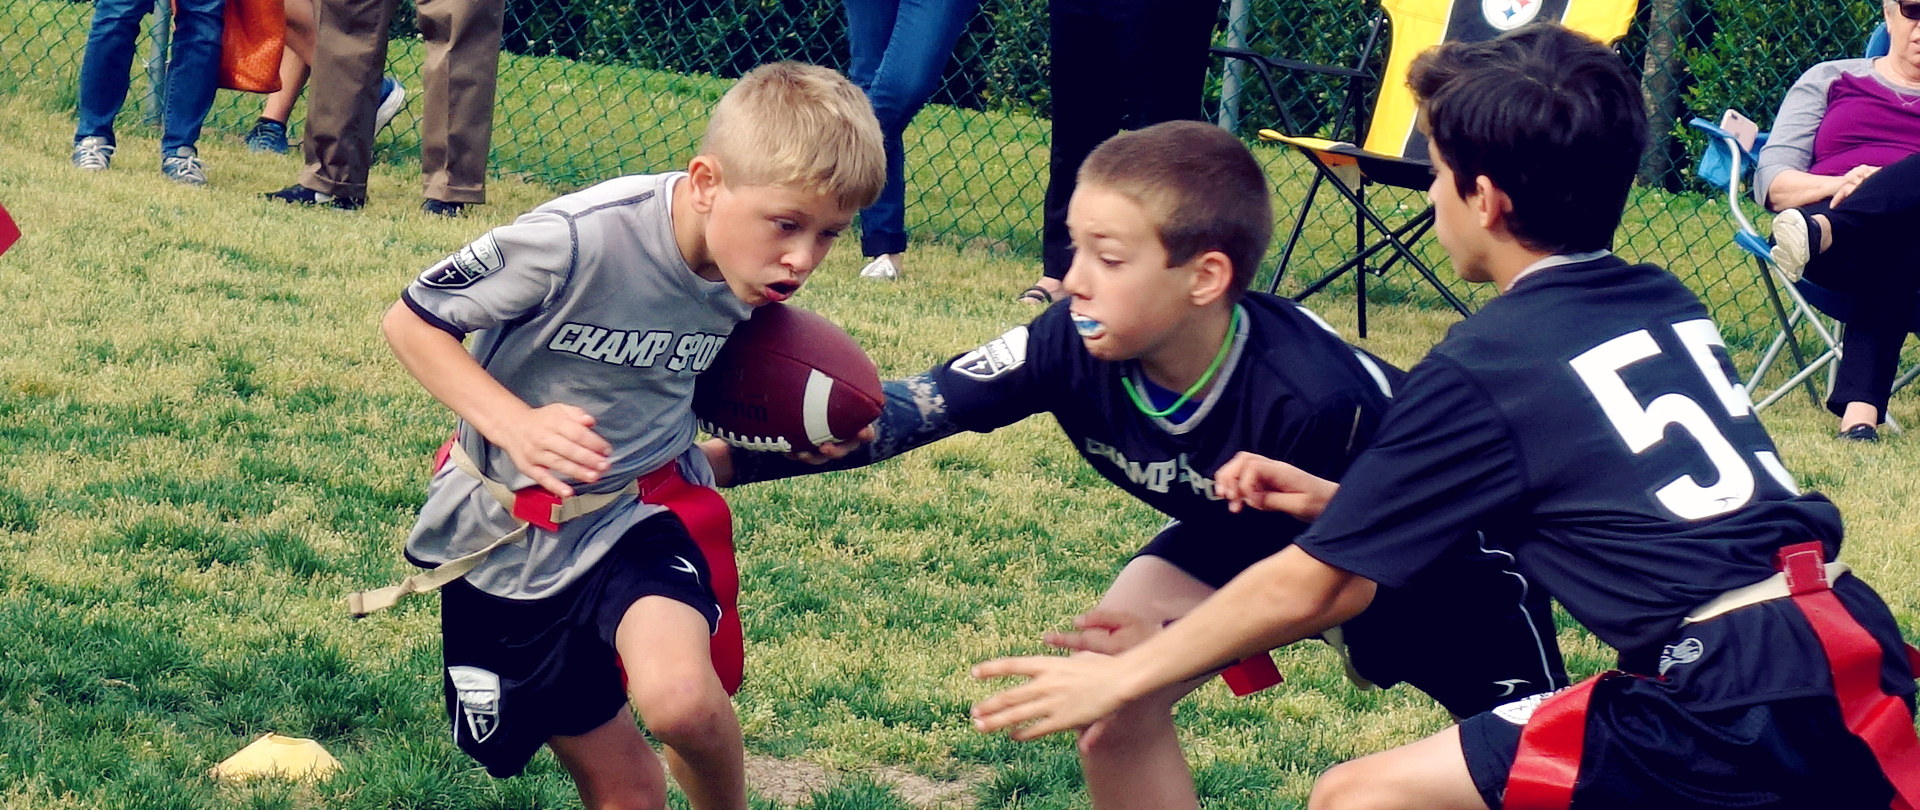 CHAMP Flag Football
Now offering leagues for ages 6–18
 
